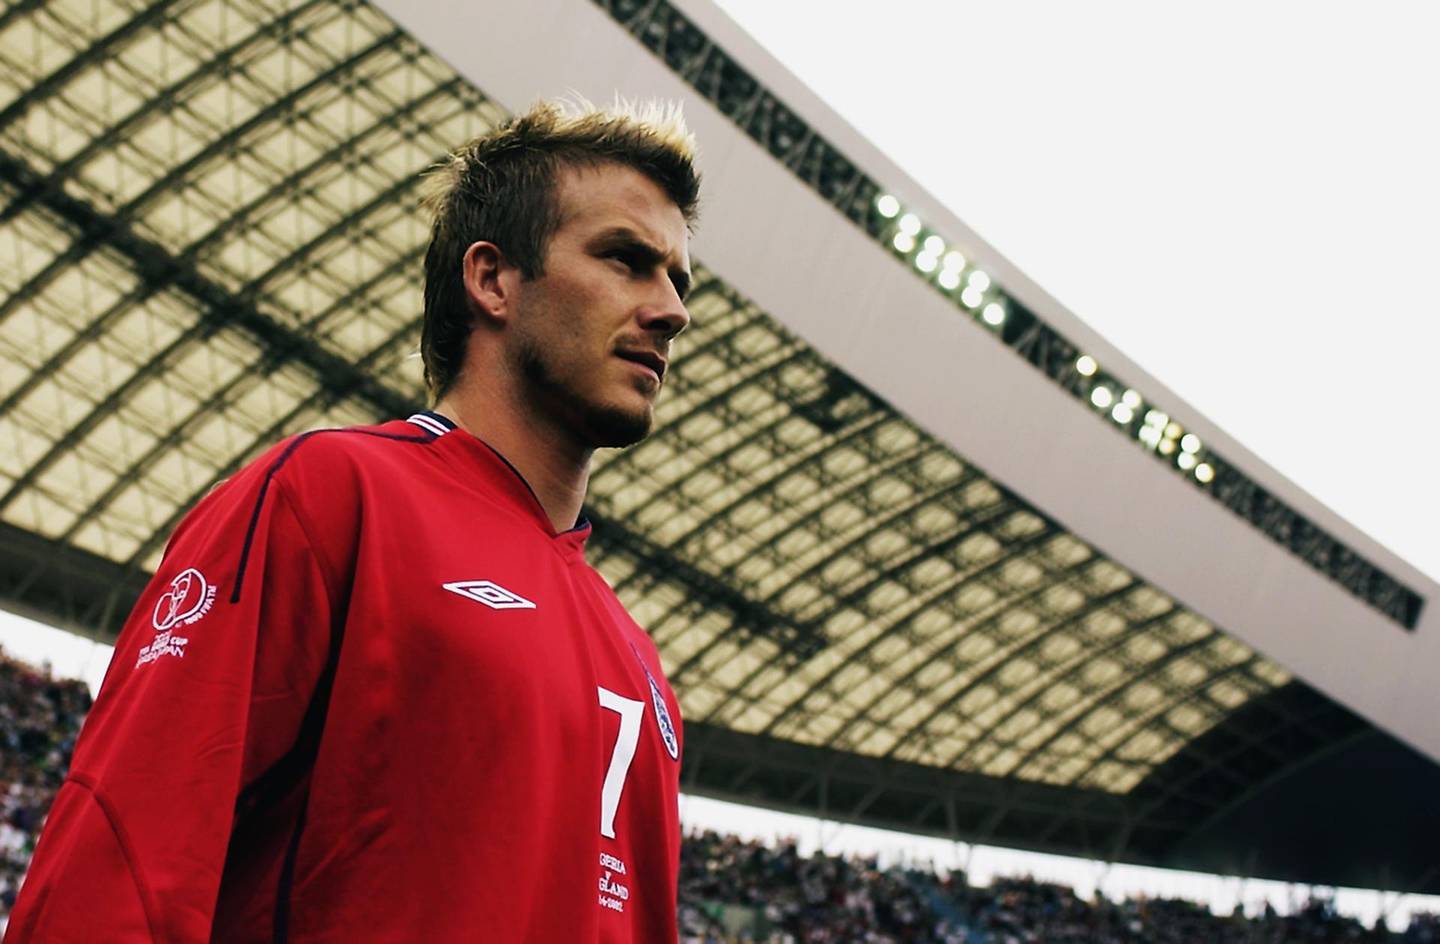 OSAKA - JUNE 12:  David Beckham of England leads the team out before the FIFA World Cup Finals 2002 Group F match between England and Nigeria played at the Osaka-Nagai Stadium, in Osaka, Japan on June 12, 2002. The match ended in a 0-0 draw. DIGITAL IMAGE. (Photo by Ross Kinnaird/Getty Images)